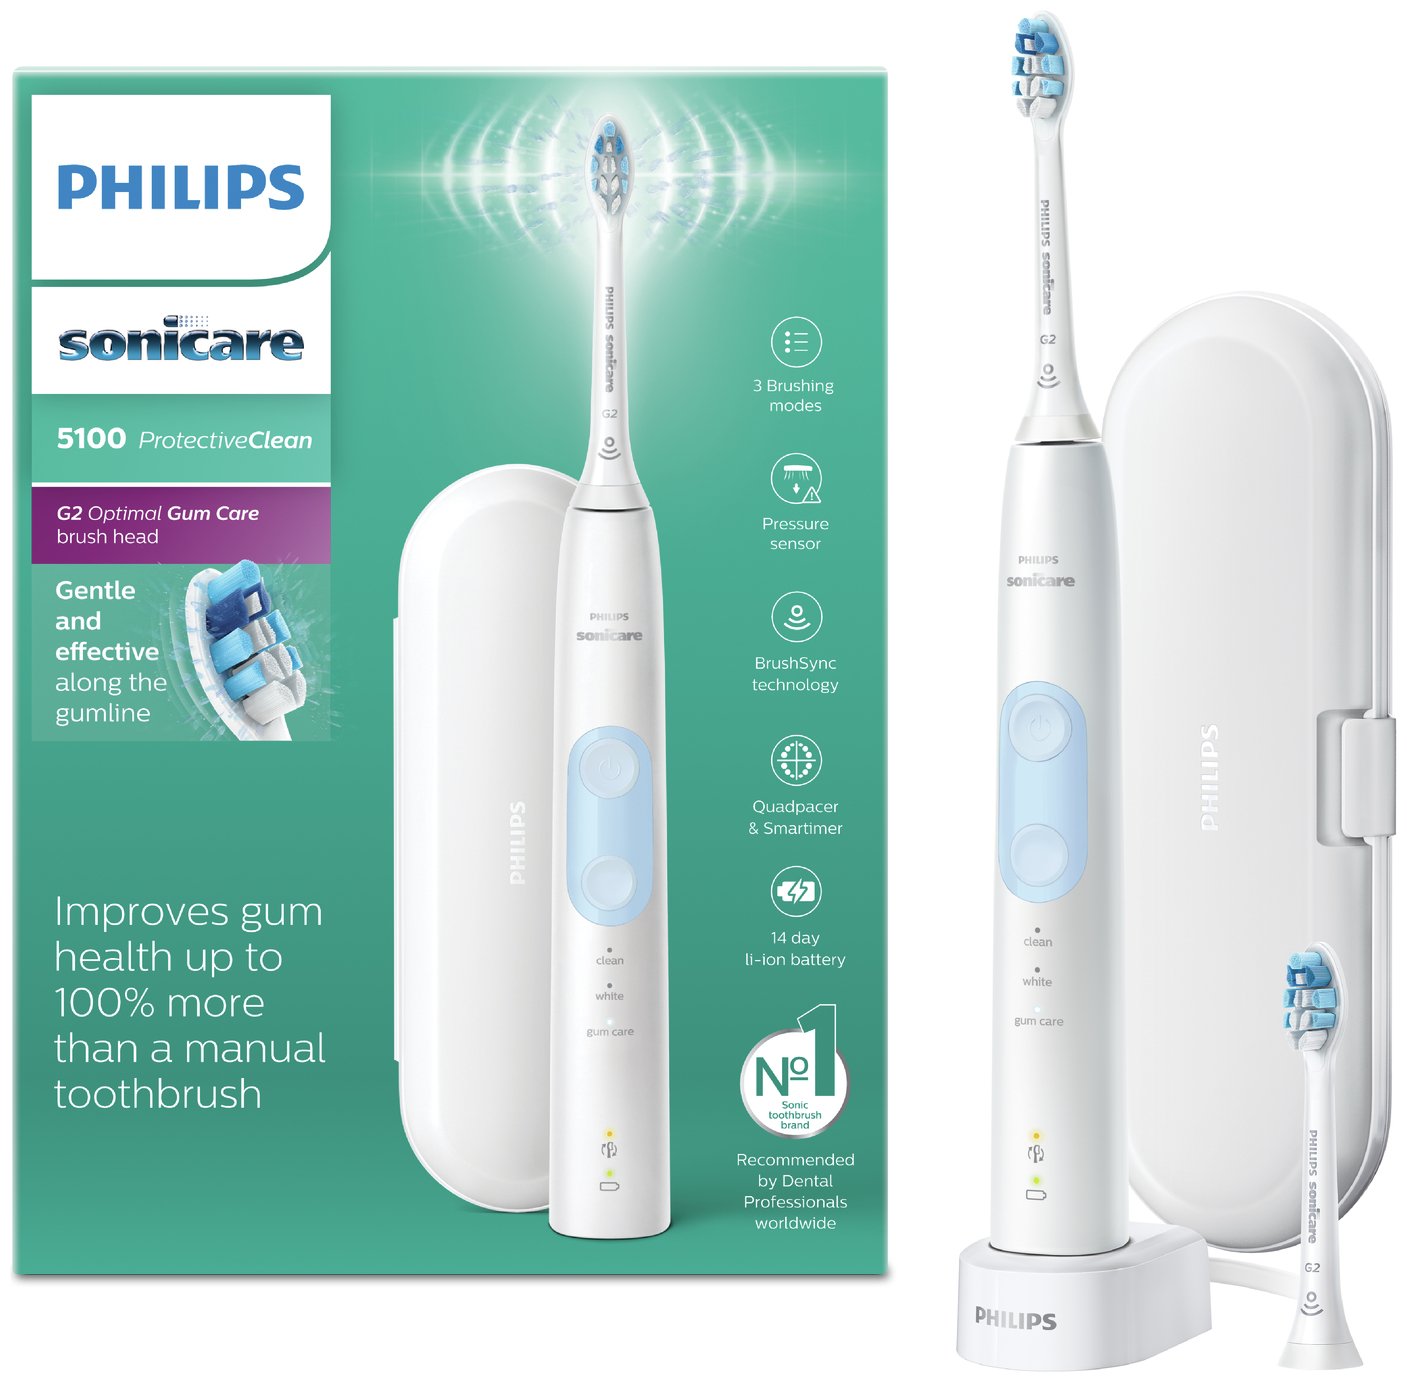 Philips ProtectiveClean Electric Toothbrush Series 5100